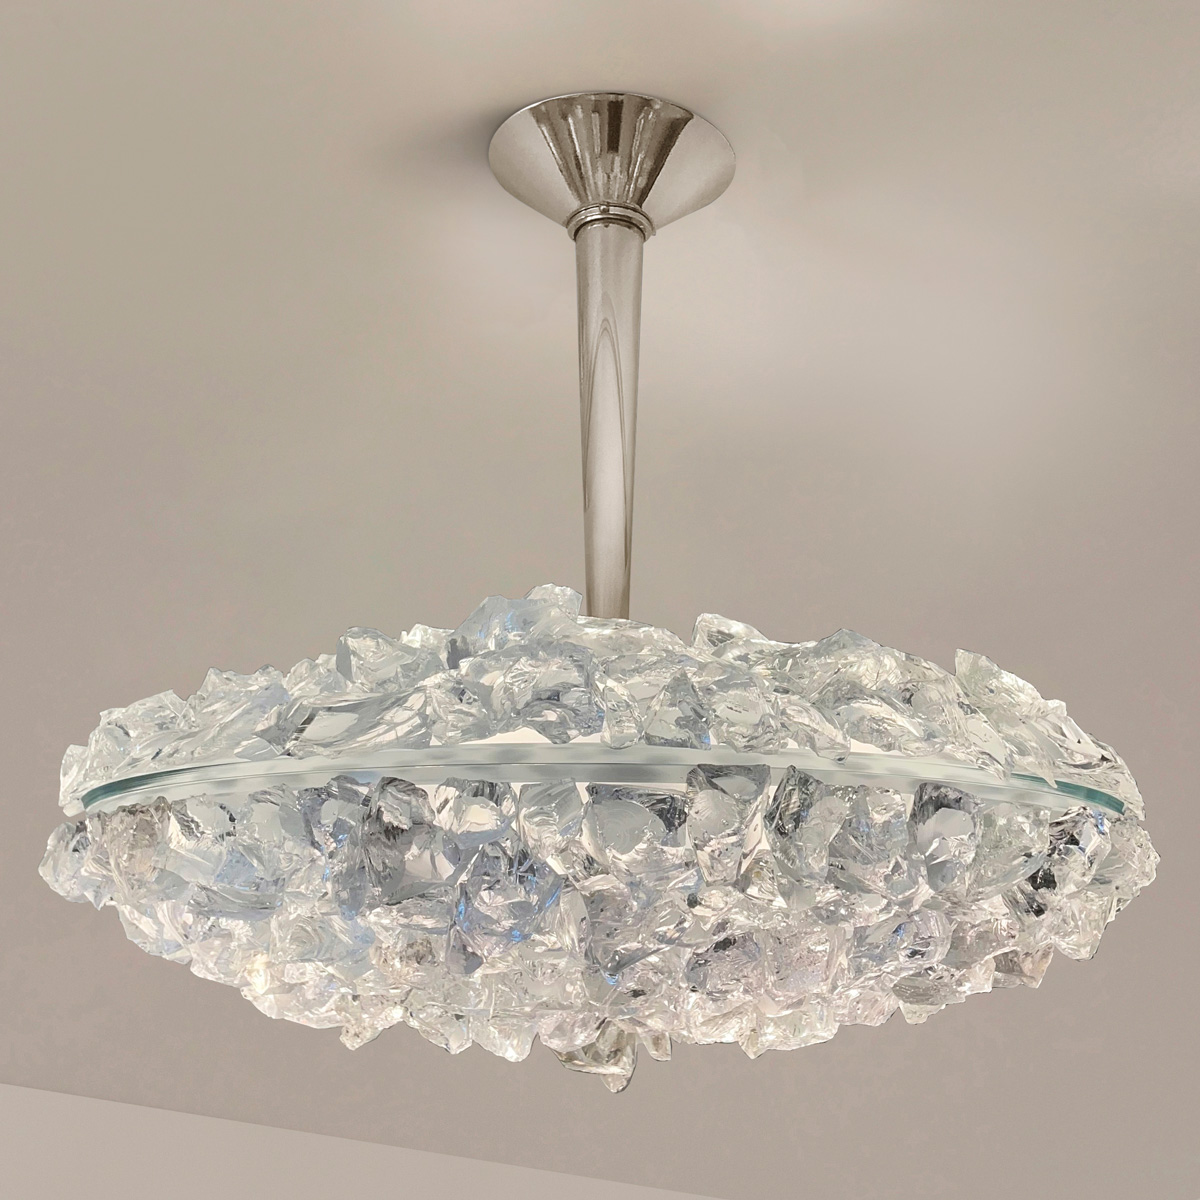 matera grande ceiling light by gaspare asaro